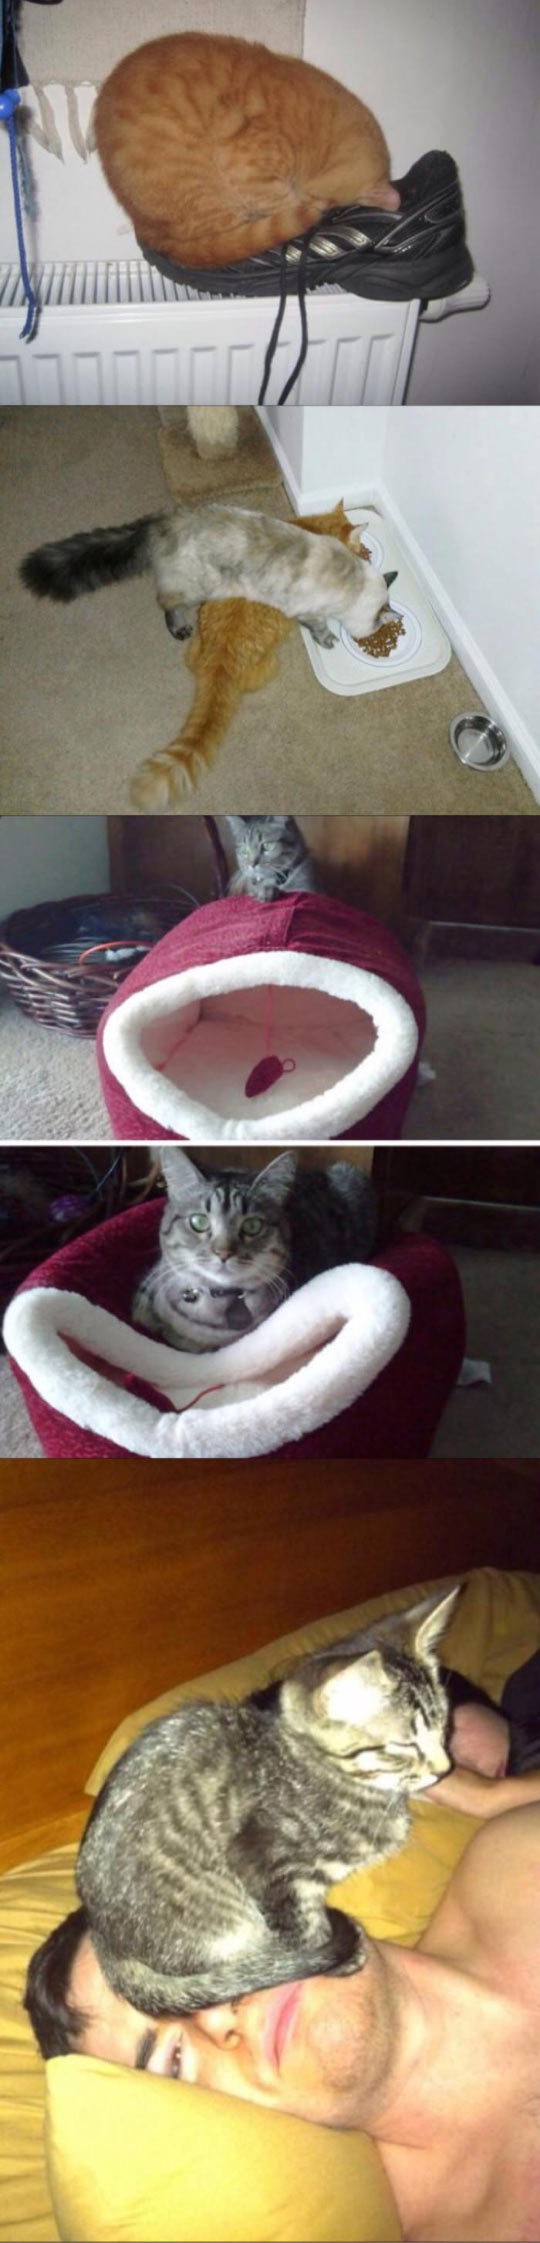 2funny-cat-playground-pillow-food-bed